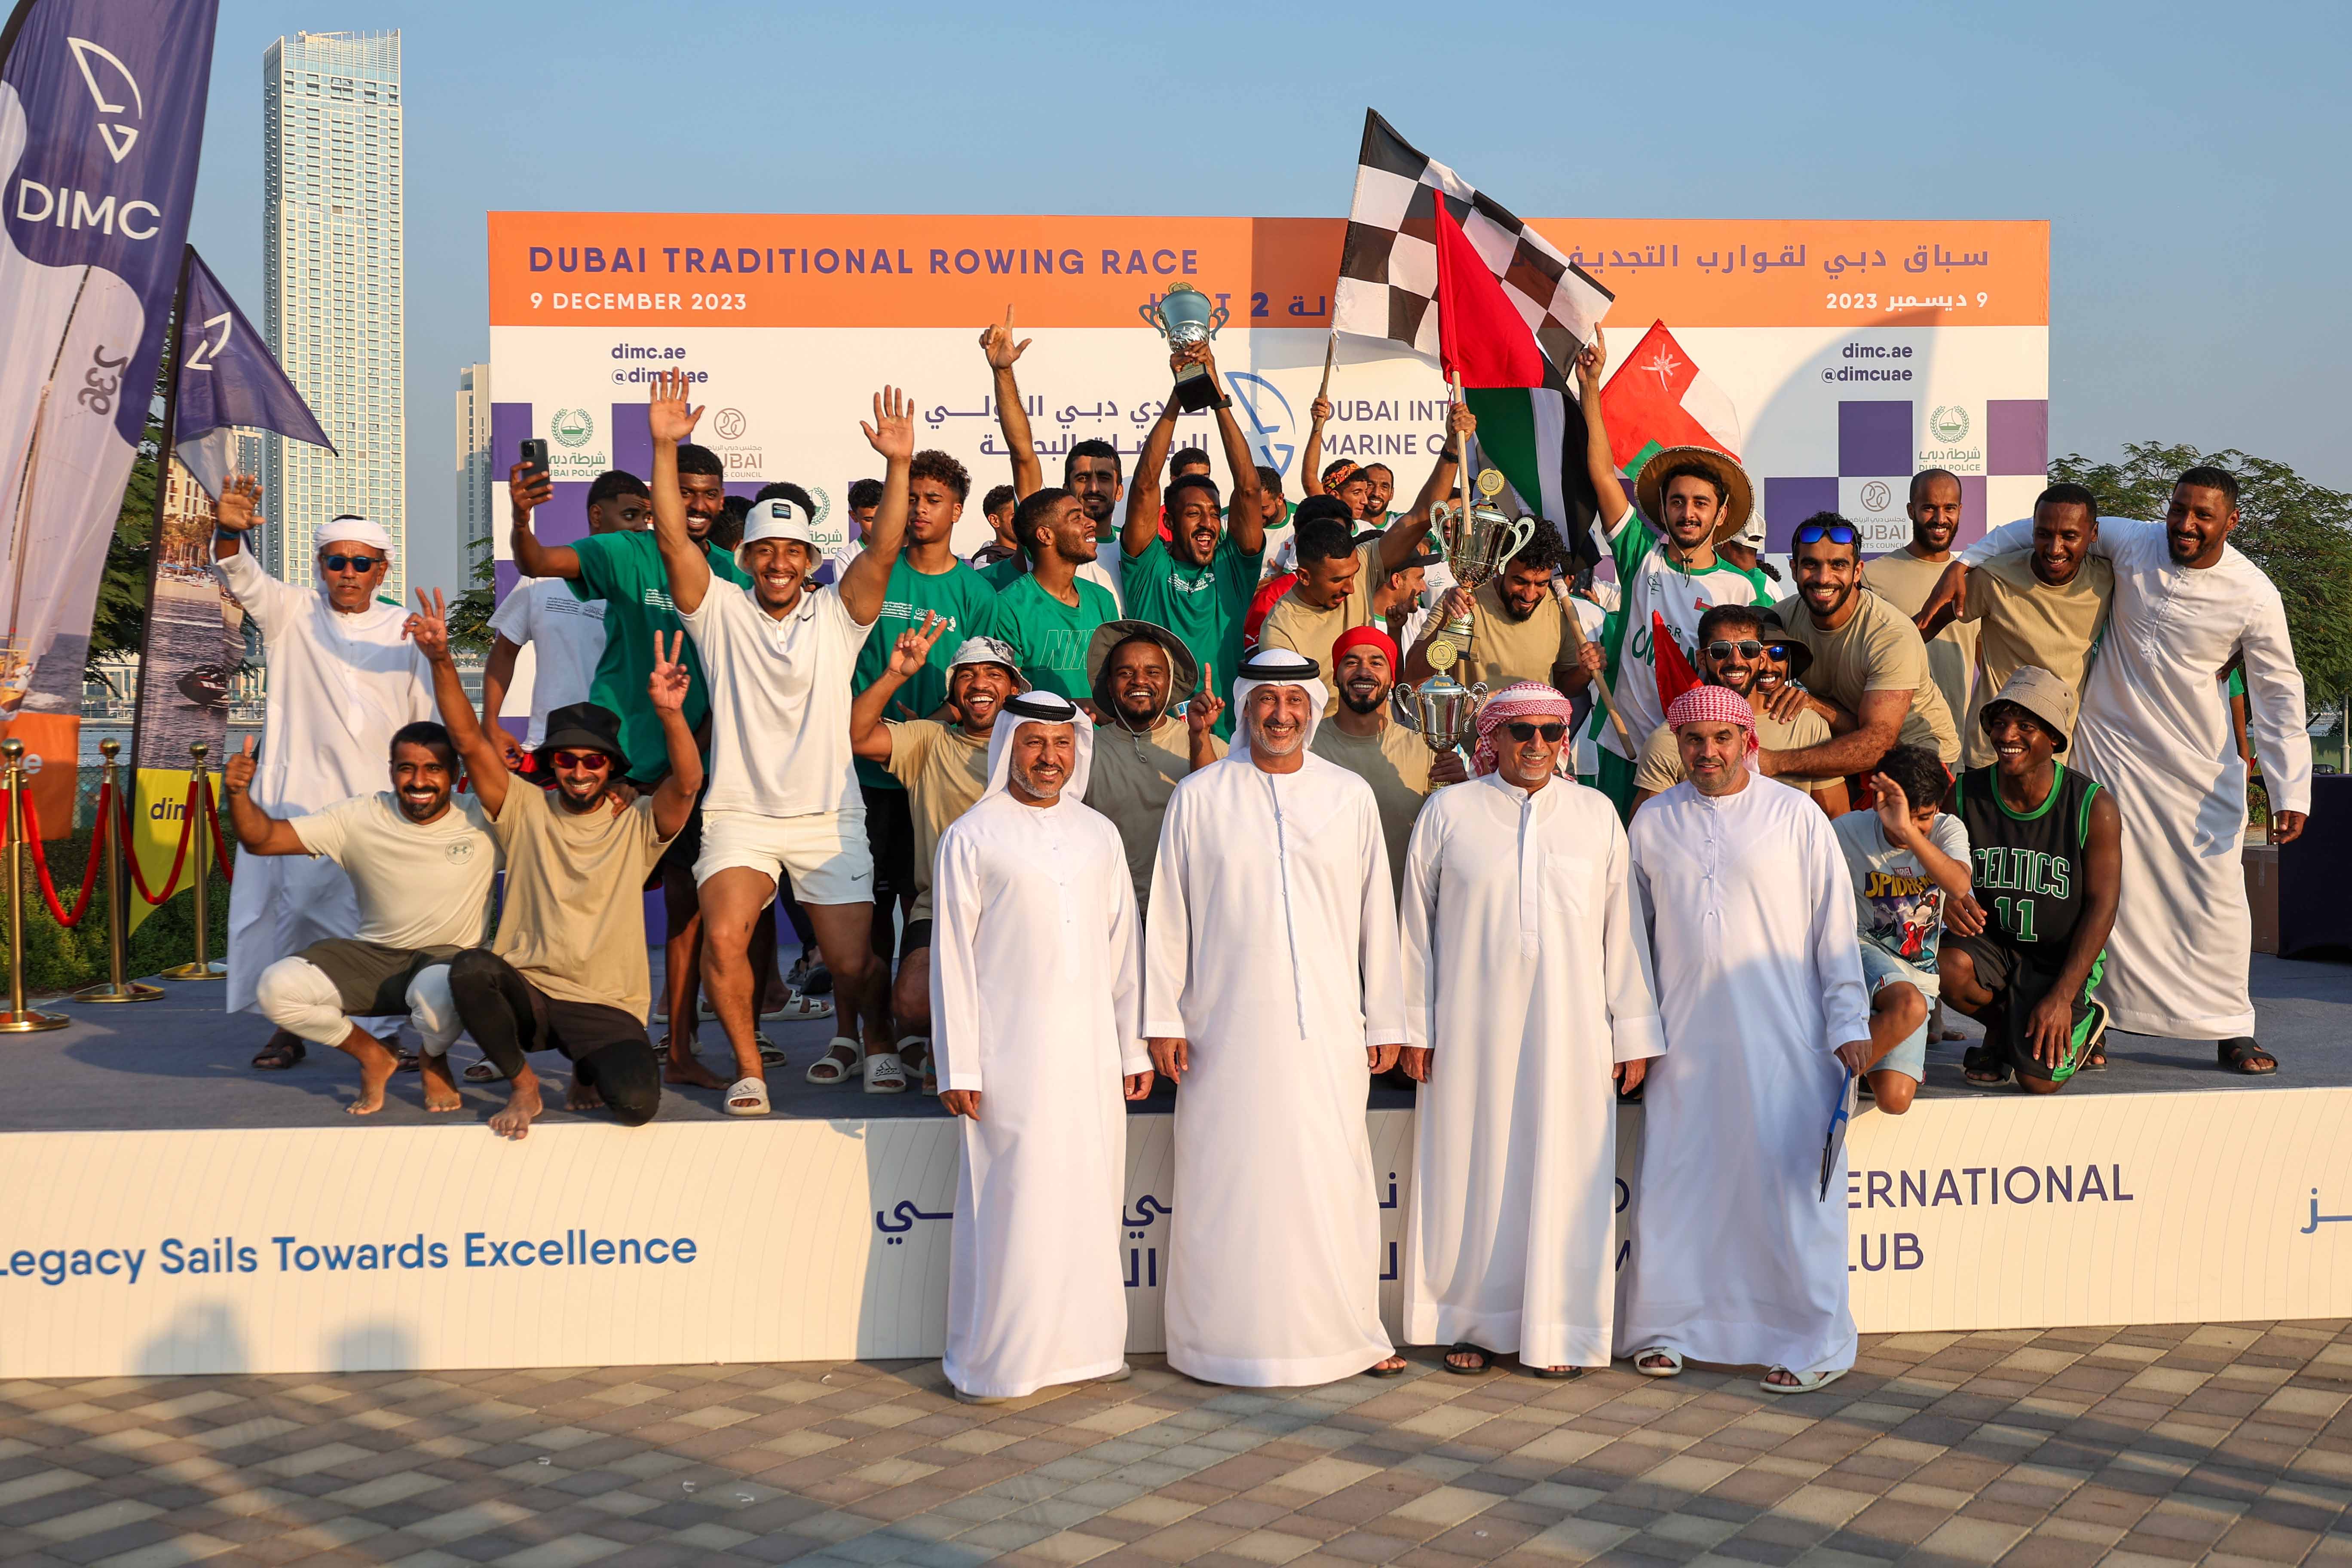 Atlas 39 Crowned Champion in the Second Traditional Rowing Race